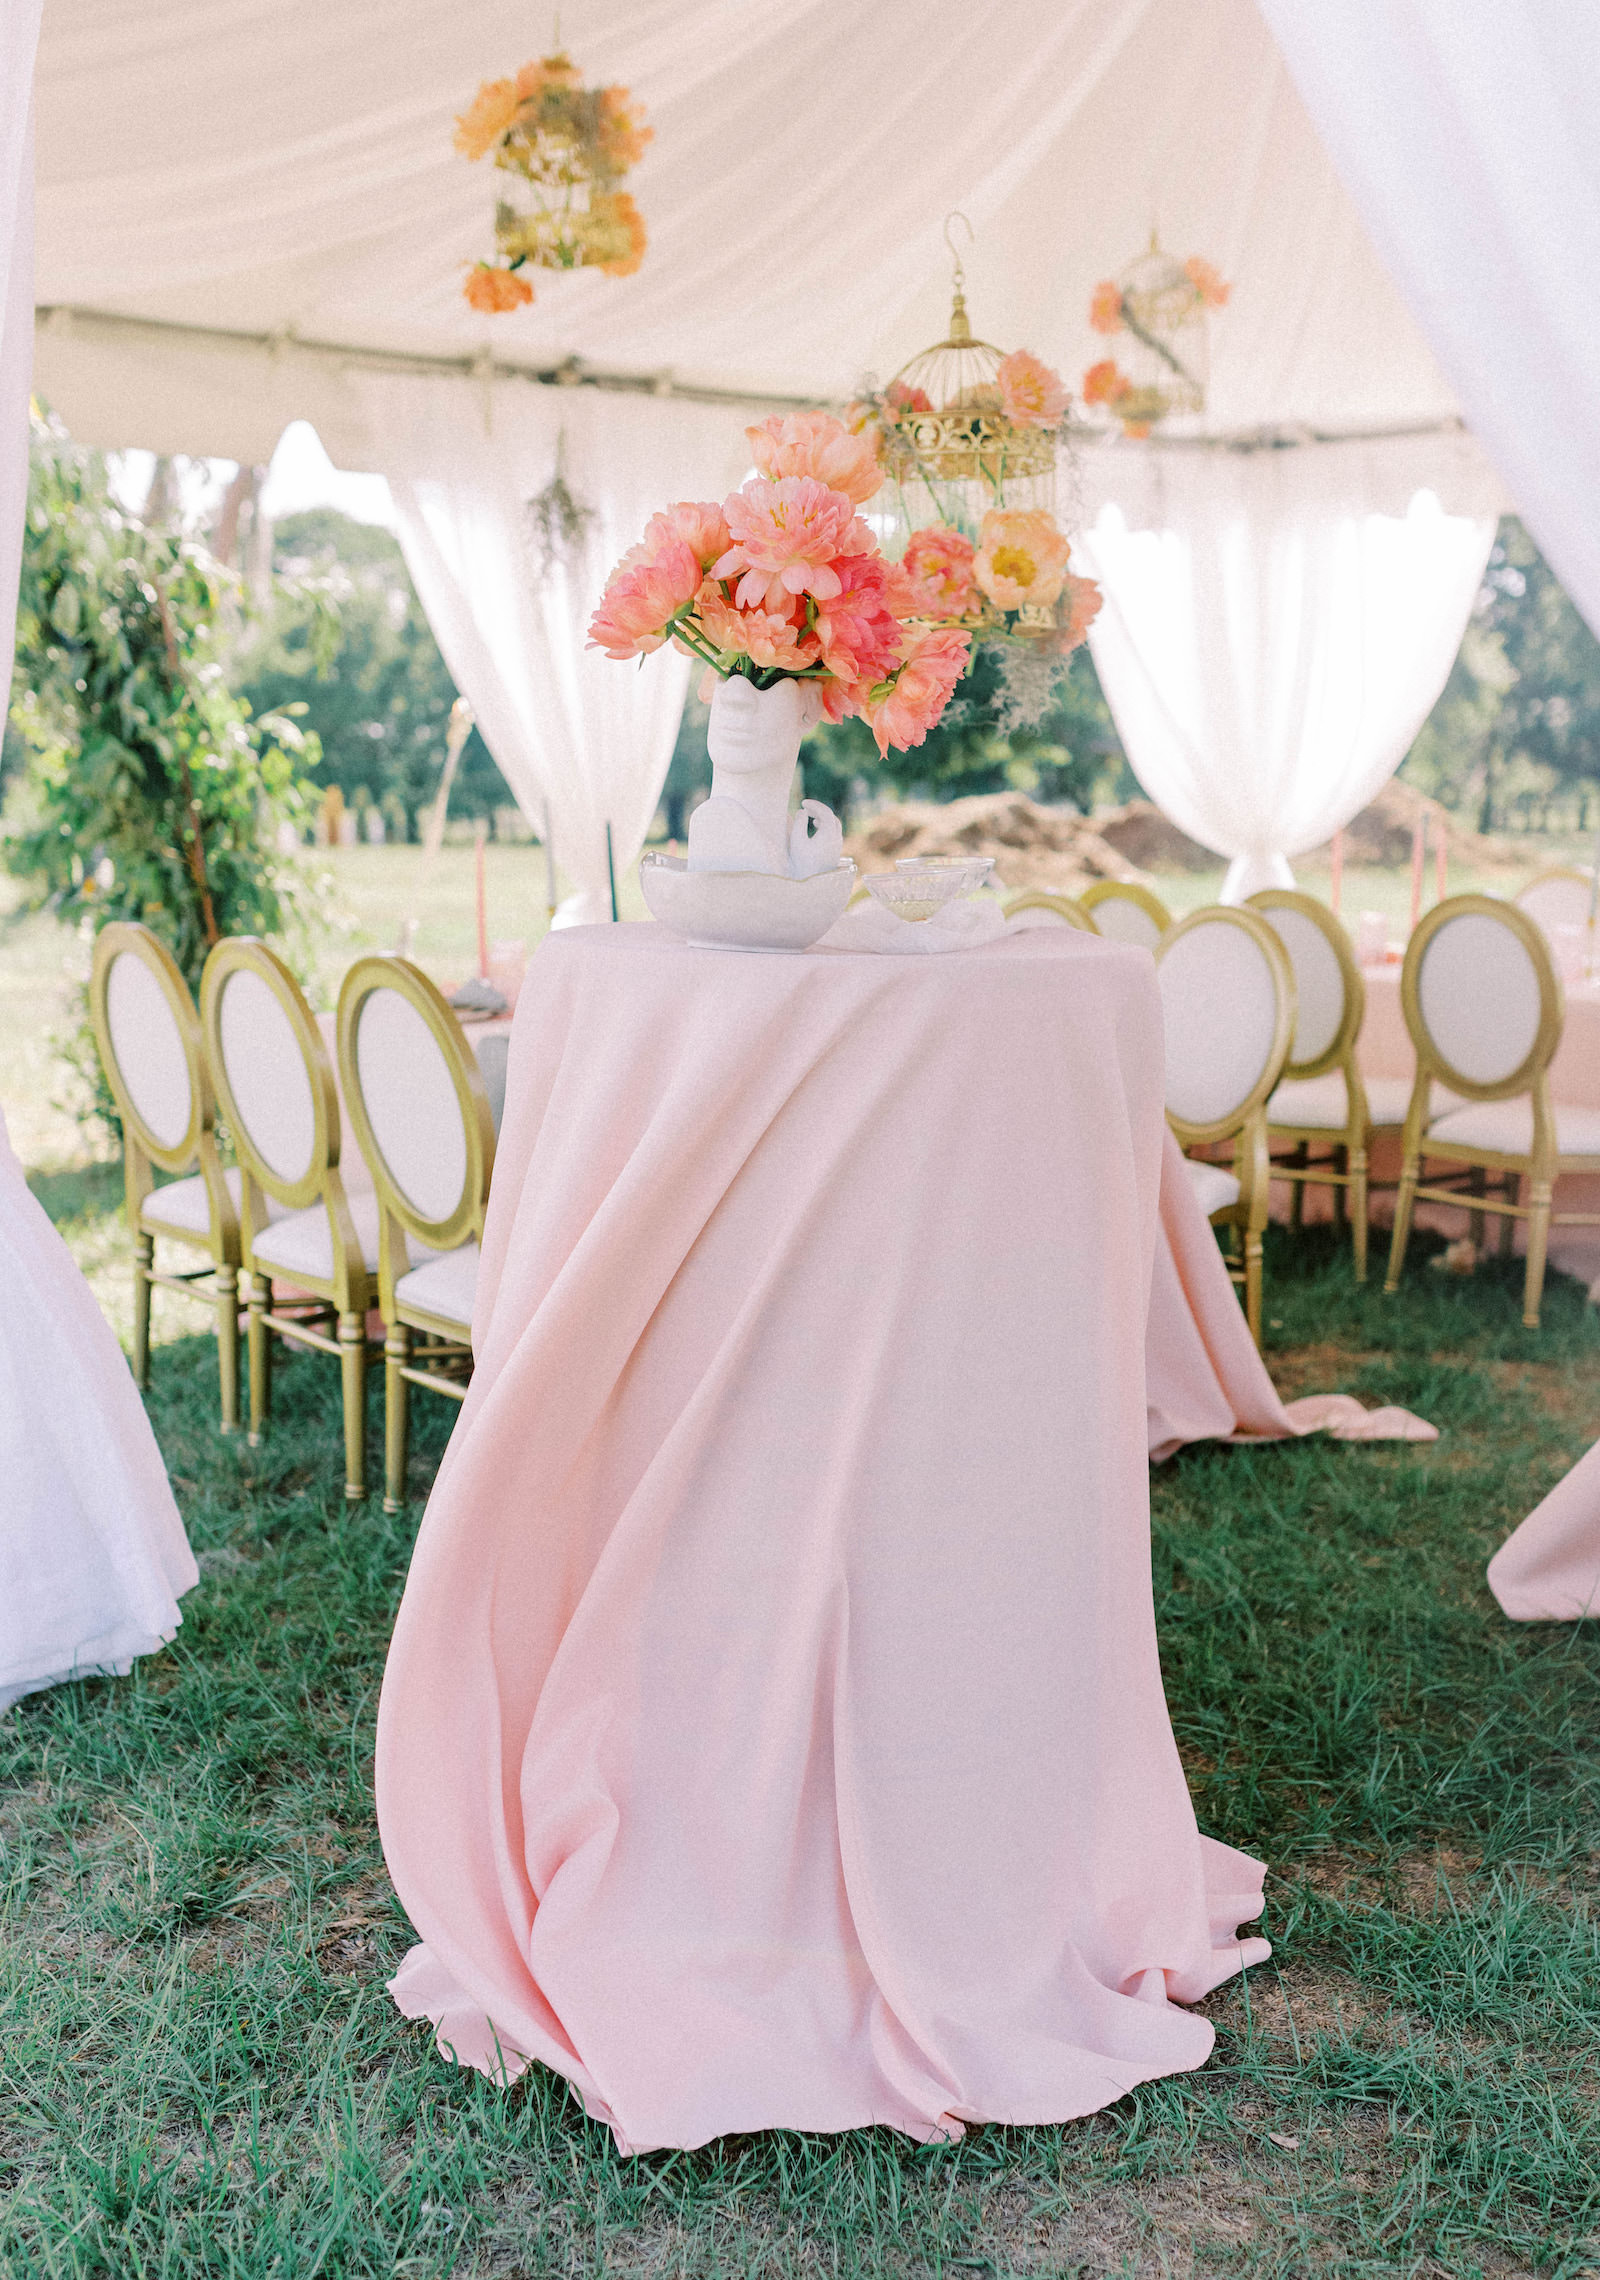 Garden Whimsical Wedding Decor, Tent with White Linen Draping, Tall Table with Blush Pink Linen, Pink, Yellow Peony Flowers in Face Vase | Tampa Wedding Venue Mill Pond Estate